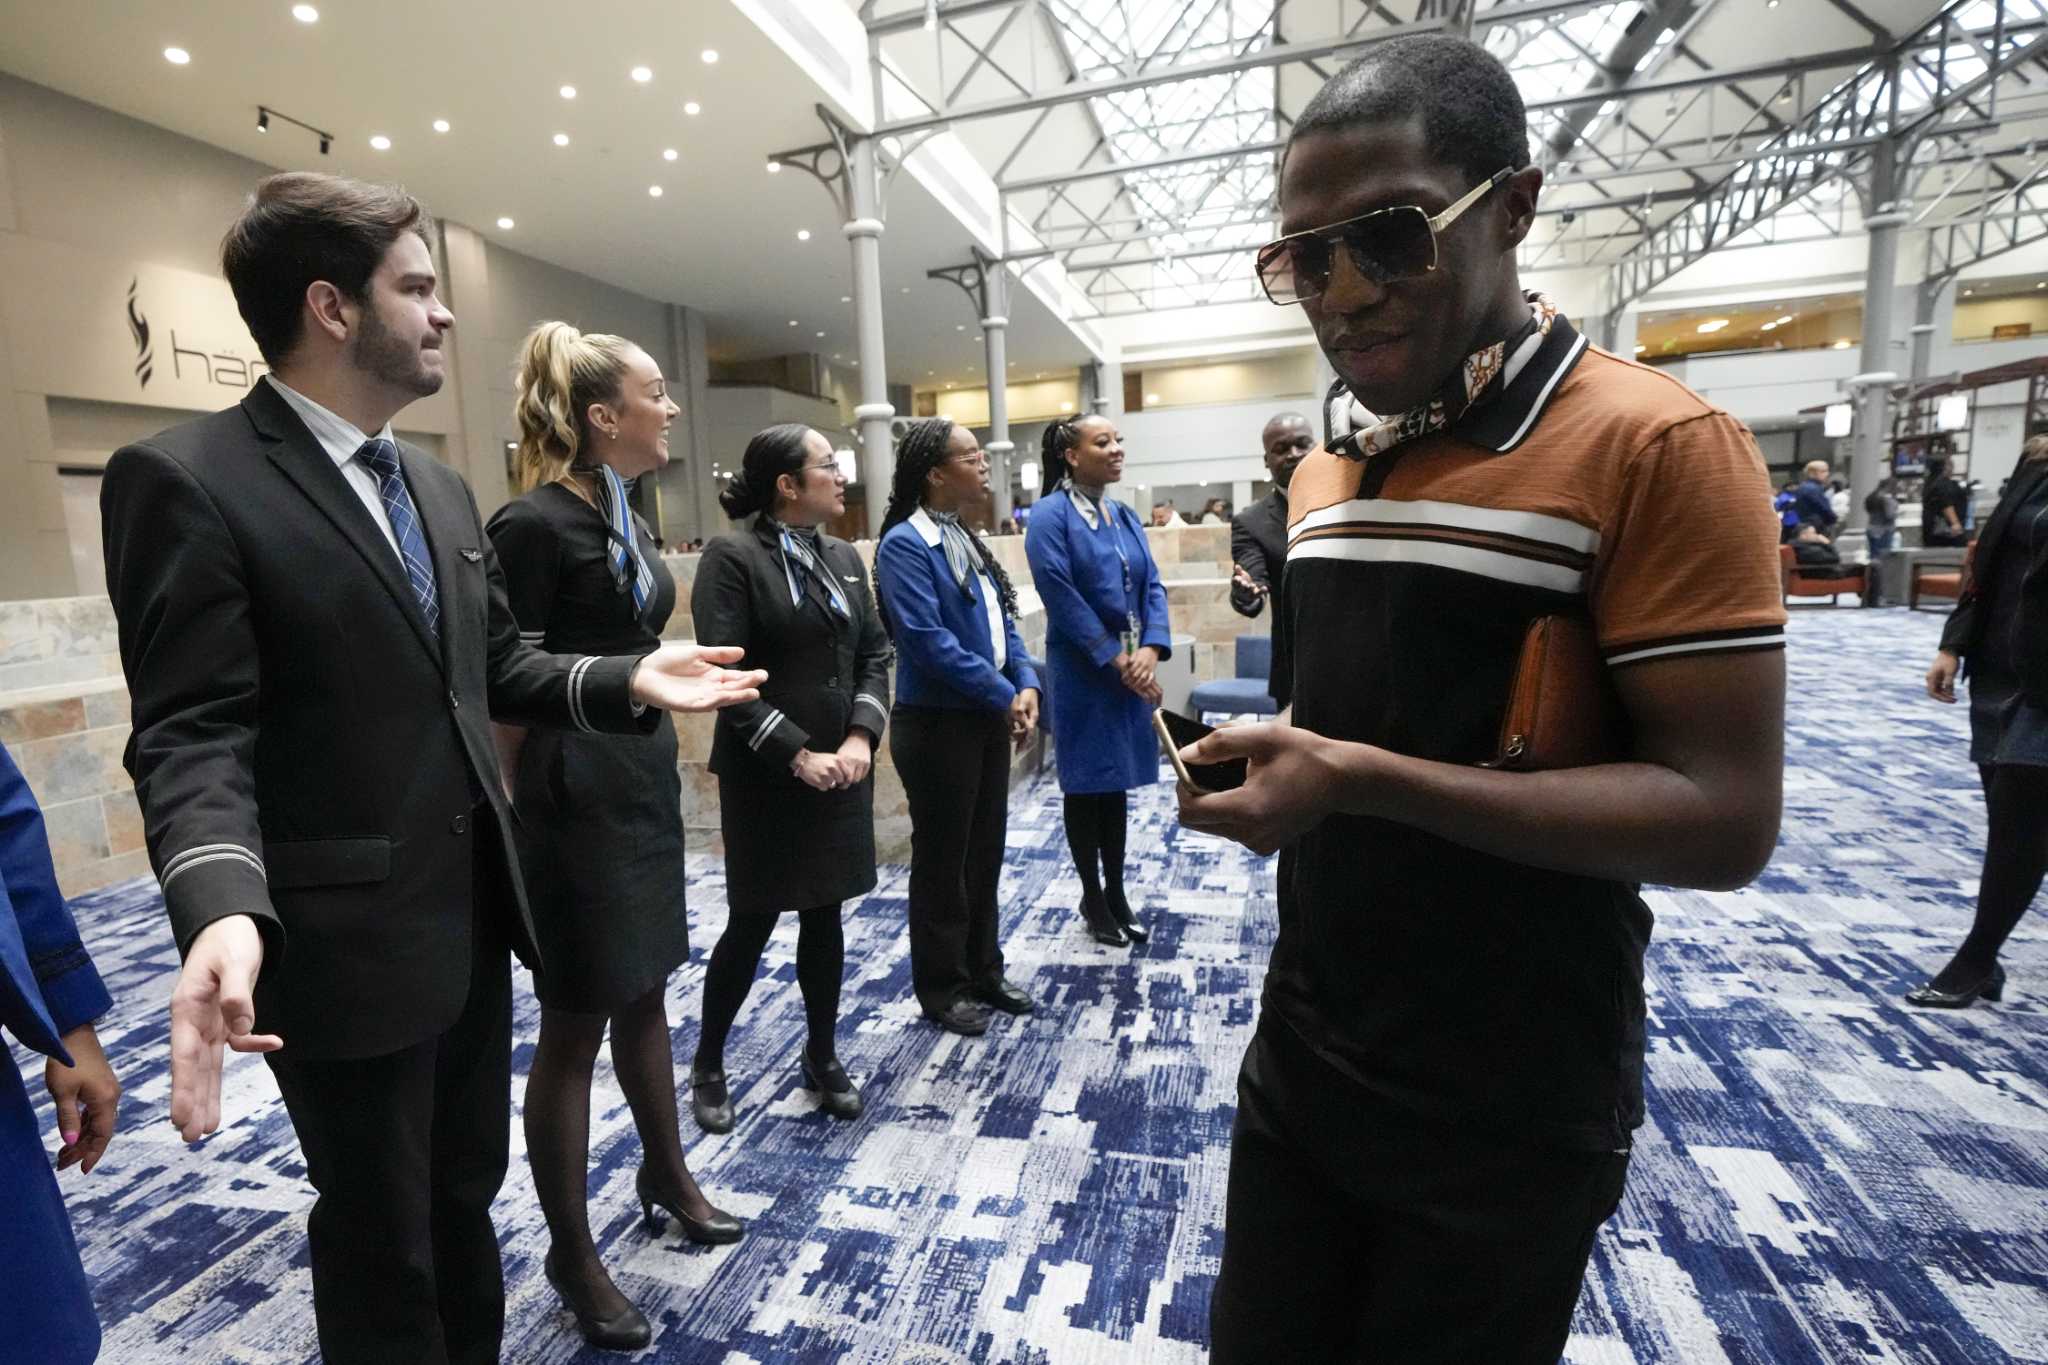 United Airlines job fair in Houston draws thousands